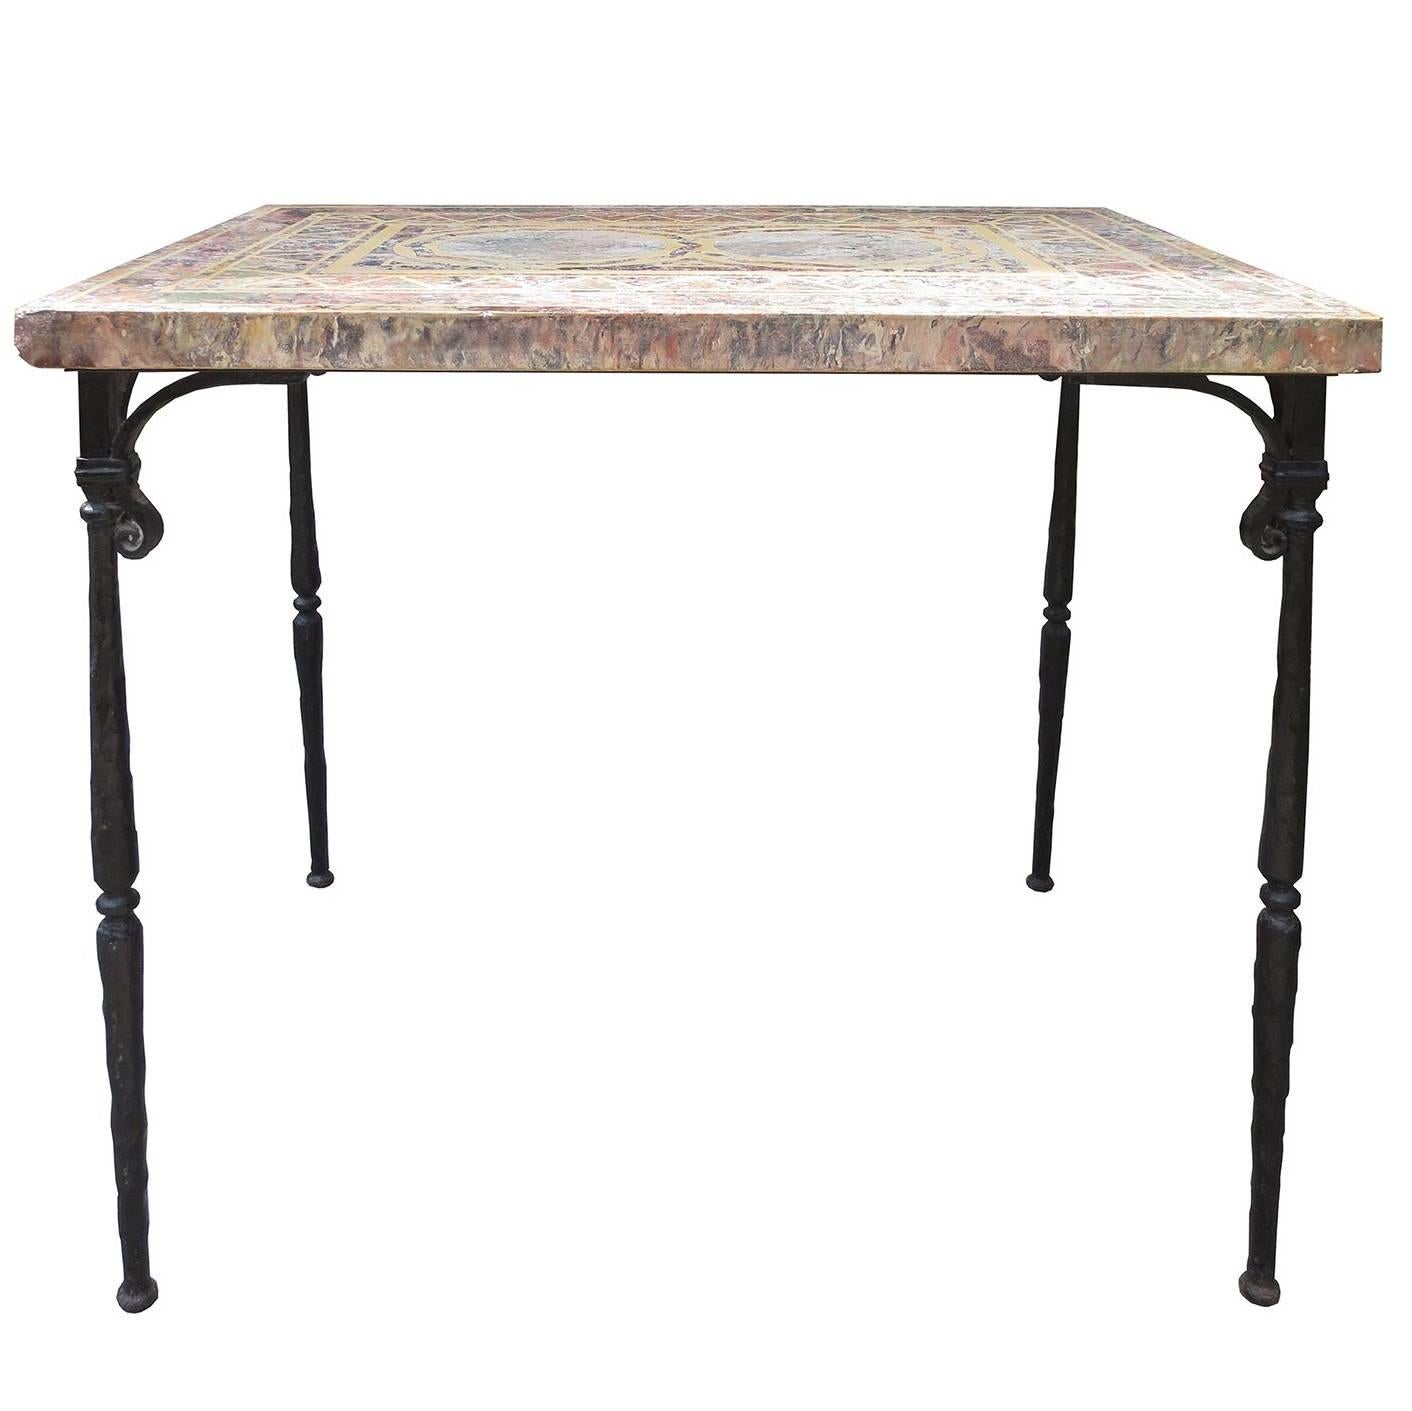 Early 20th Century Italian Pietra Dura Top Table with Old Iron Base